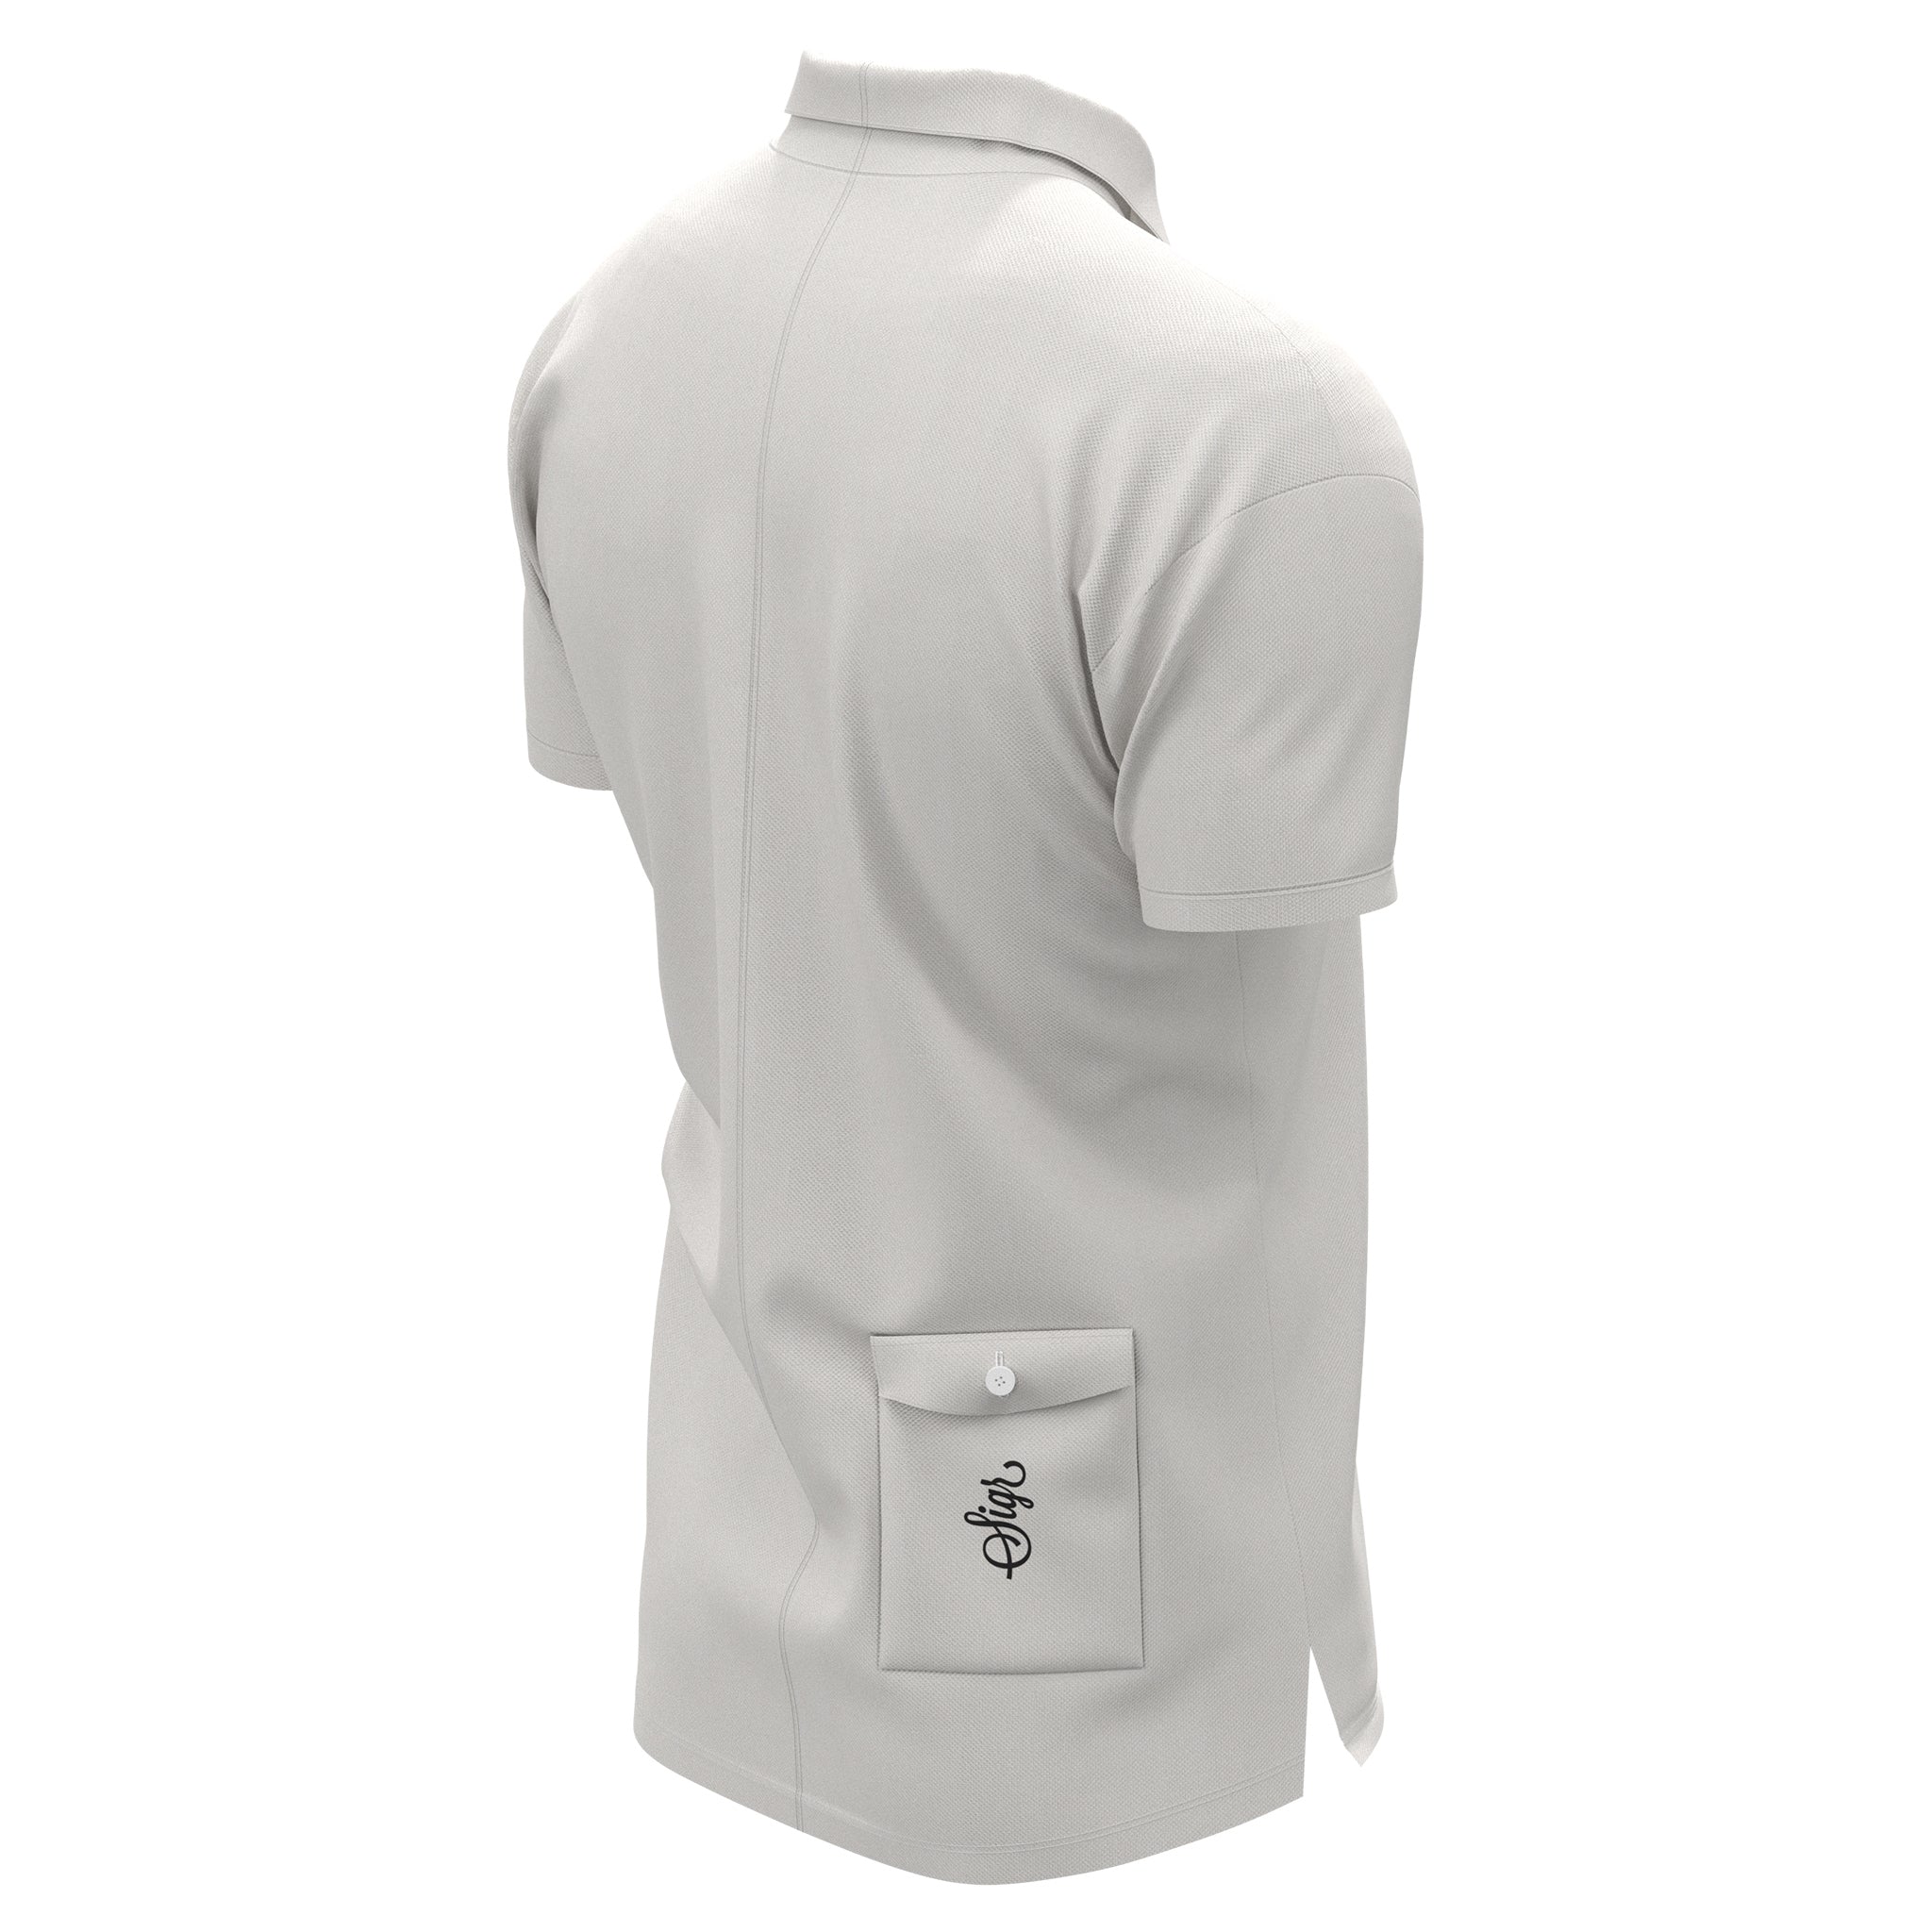 Pike - White Polo Shirt with Sigr Logo for Men